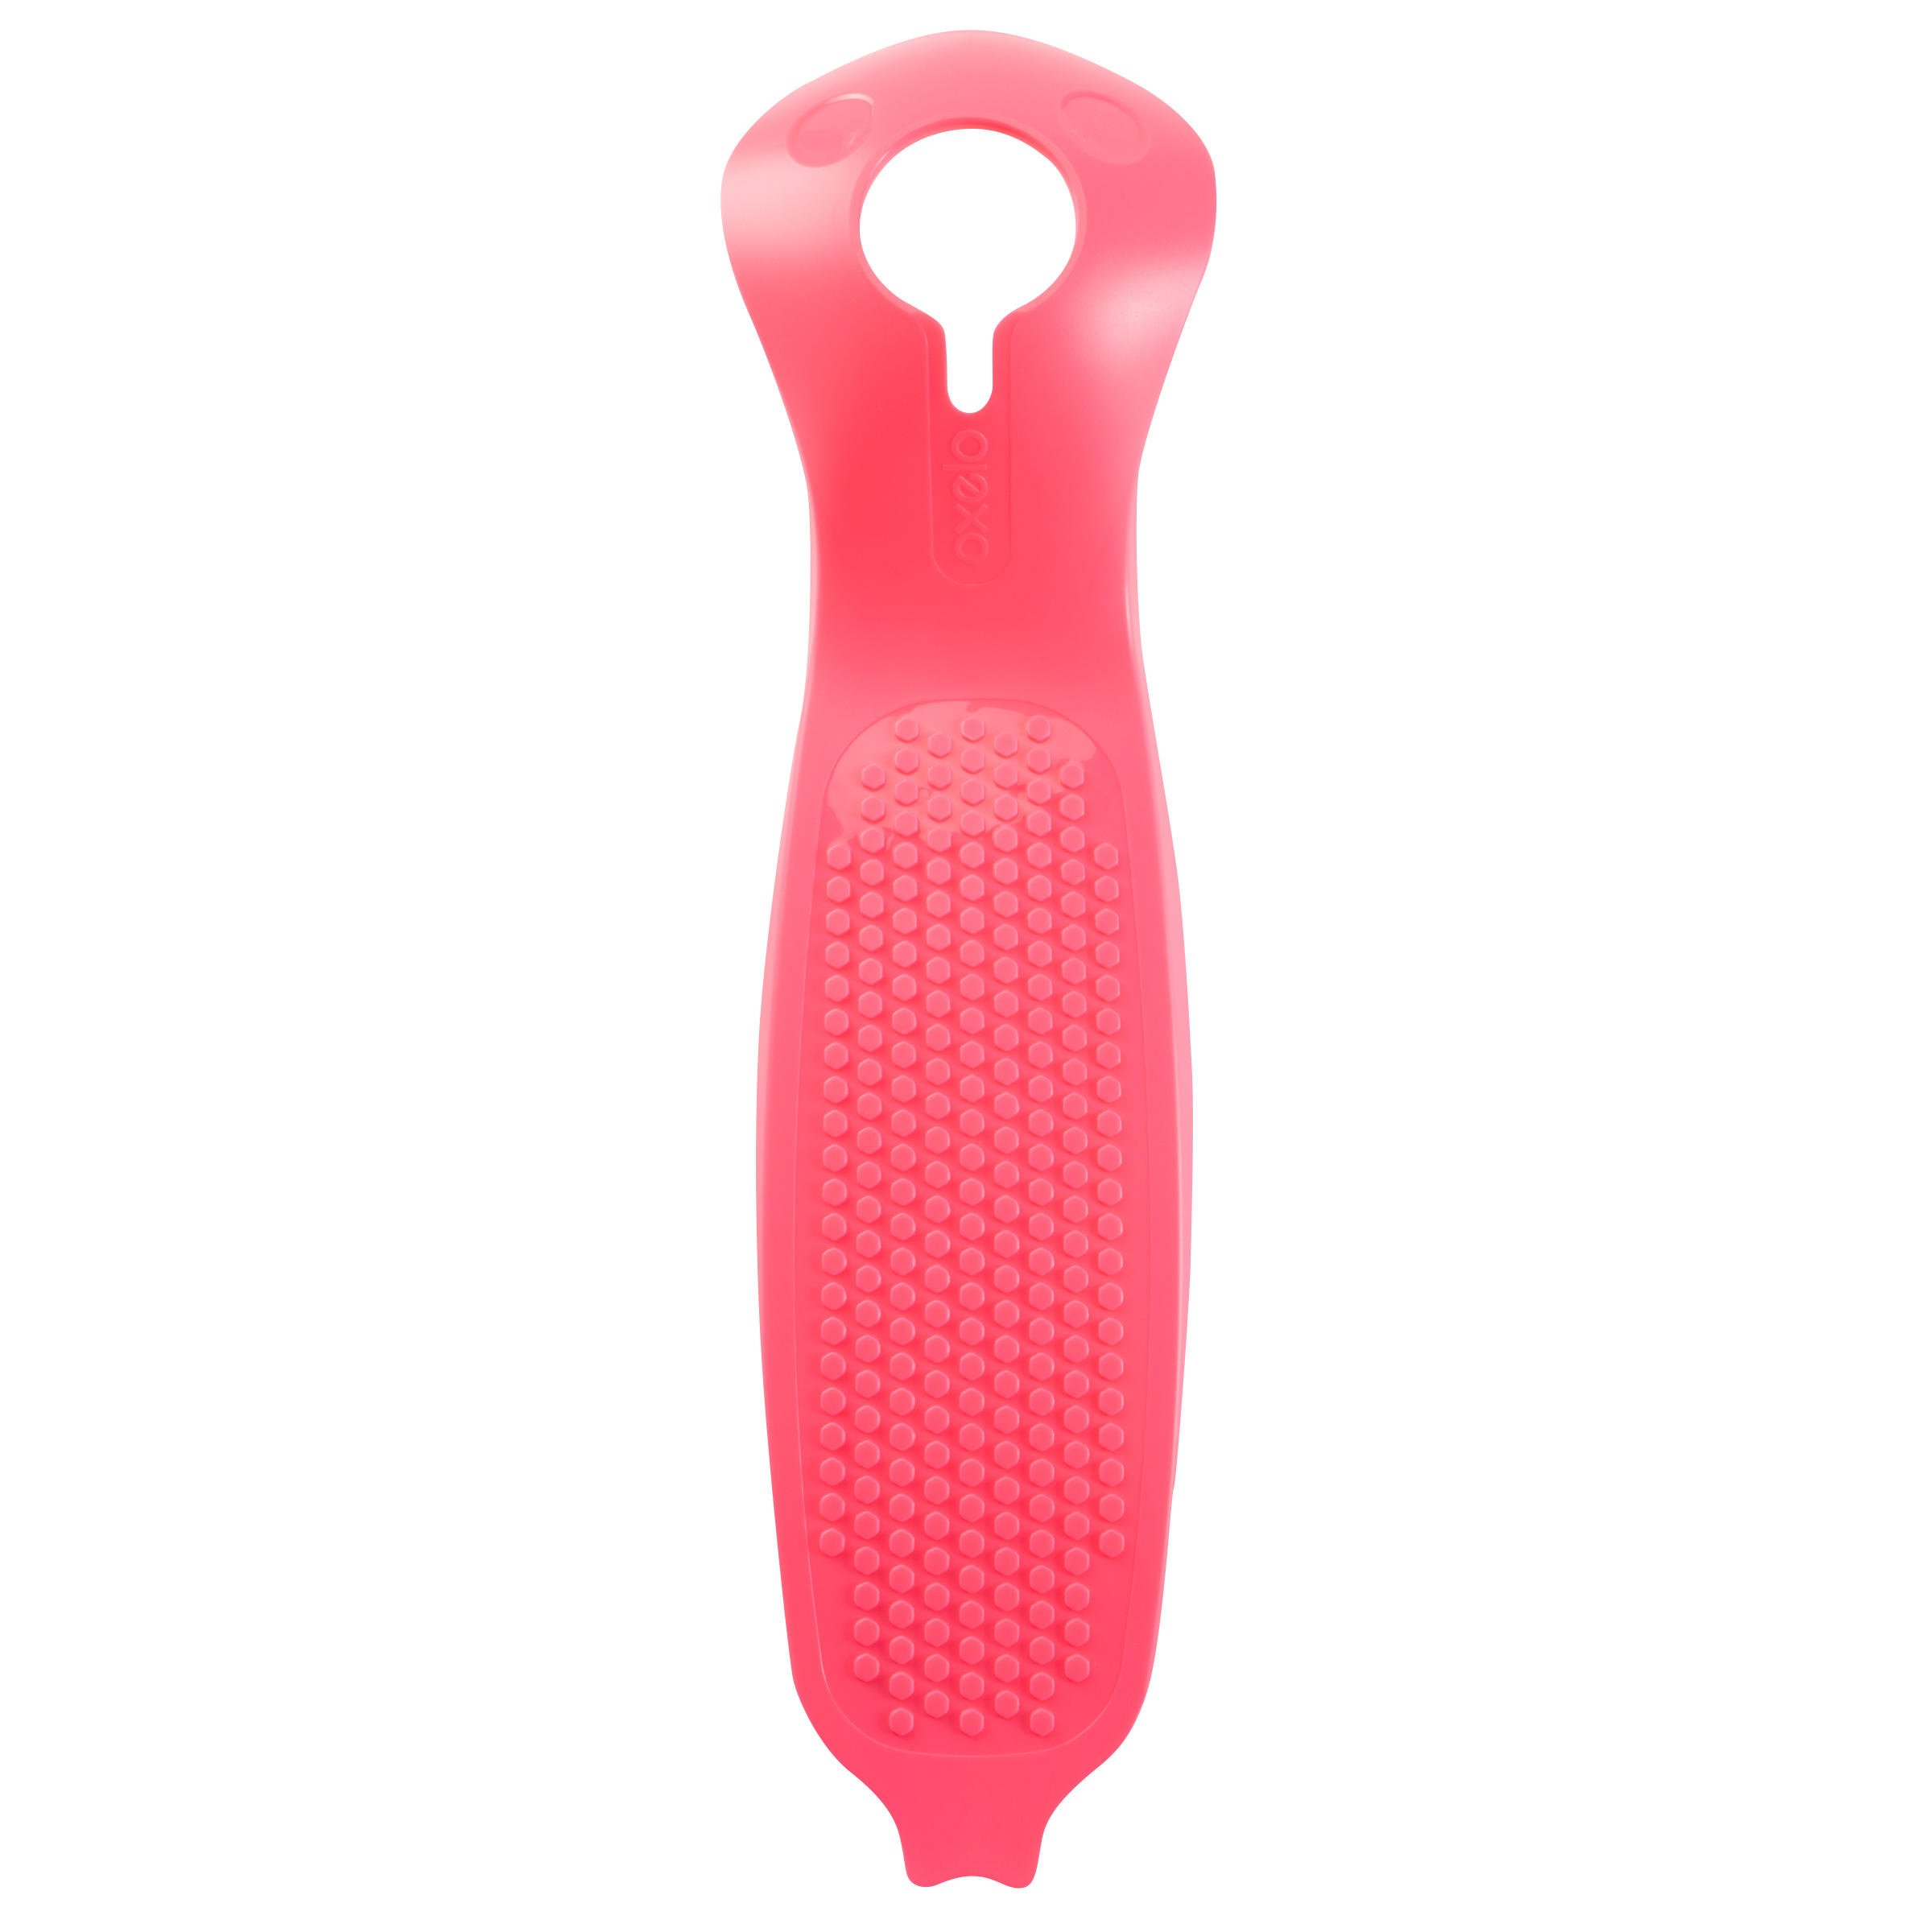 OXELO B1 Scooter Shell - Neon Pink